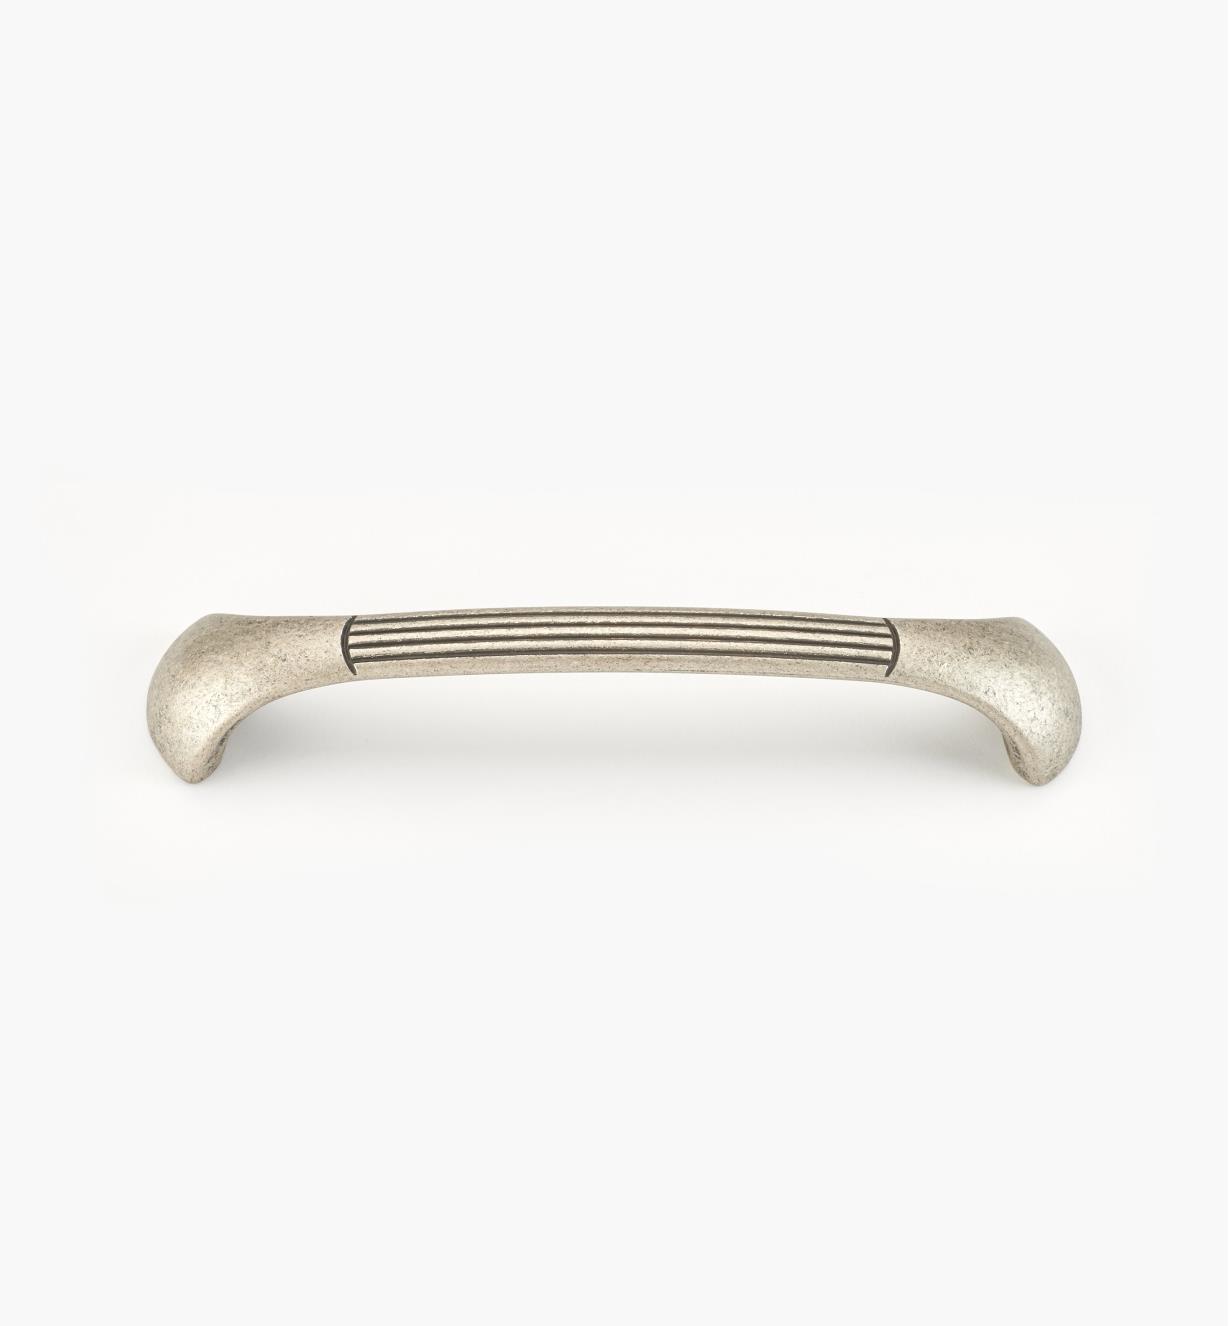 00A7118 - 160mm Handle